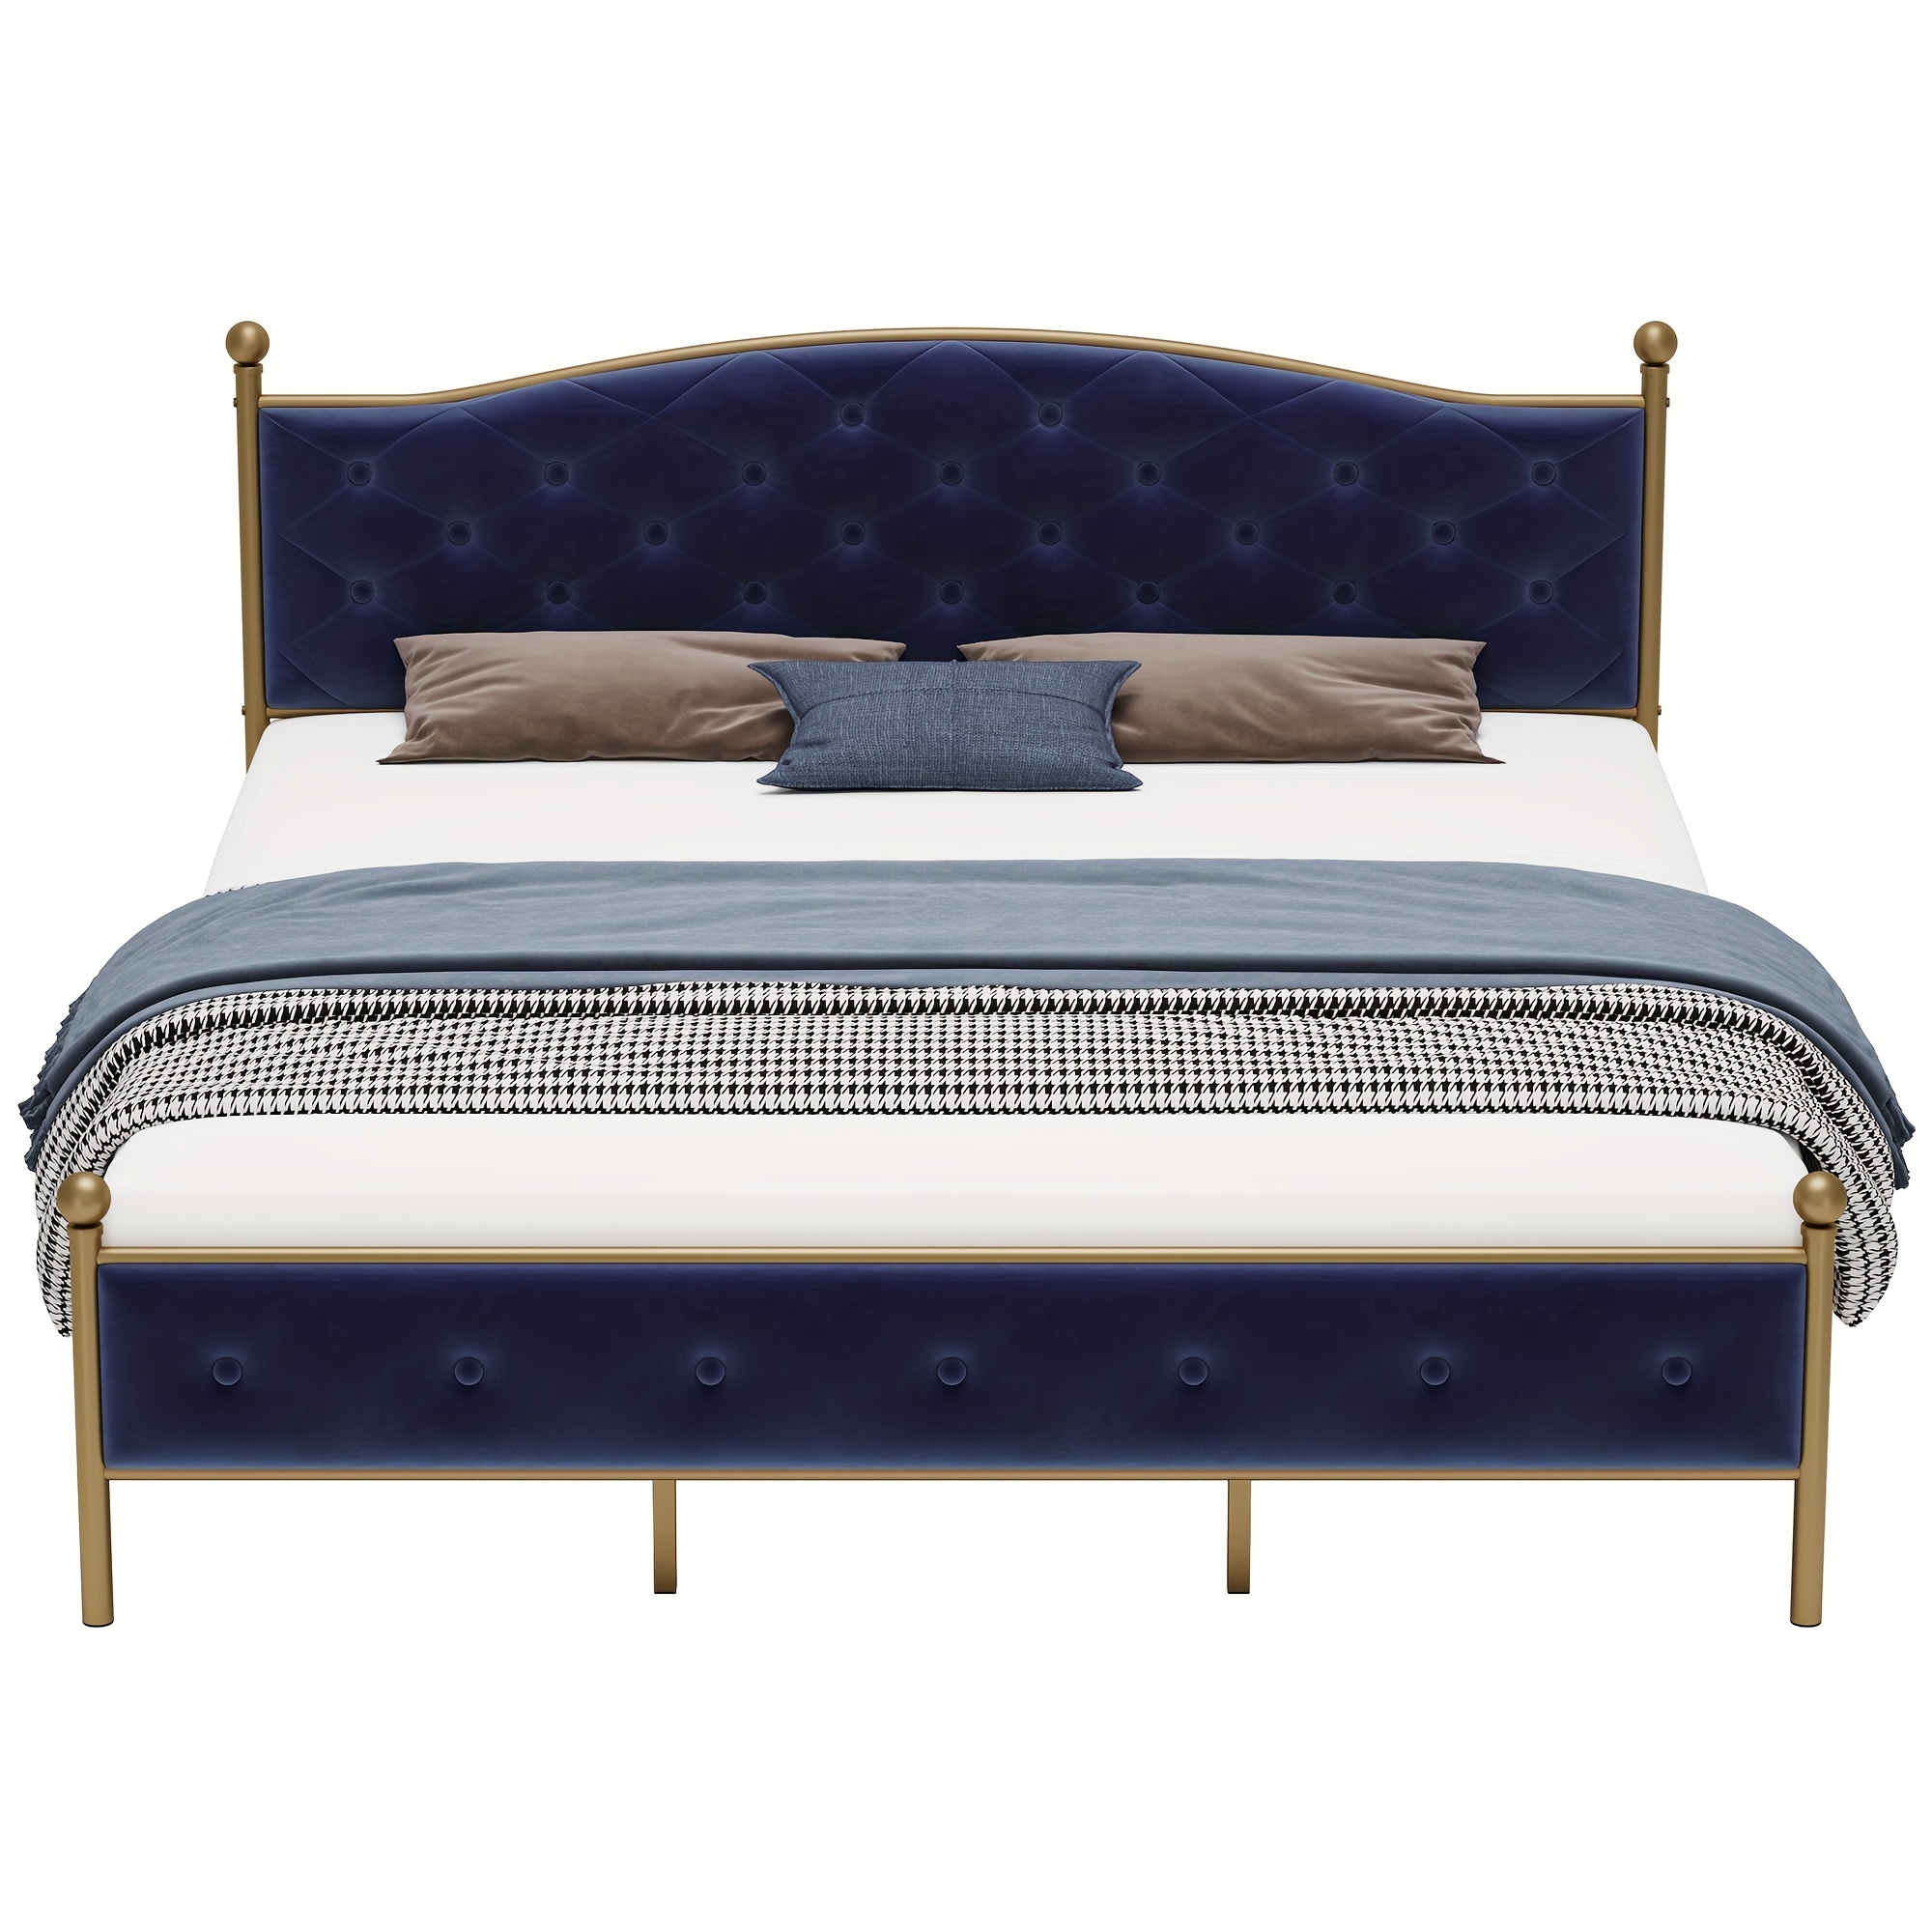 

Full Size Upholstered Bed Frame, Gold Platform Bed With Velvet Headboard, Heavy Duty Mattress Foundation With Wood Slats, Noise Free Design, No Box Spring Needed In Blue